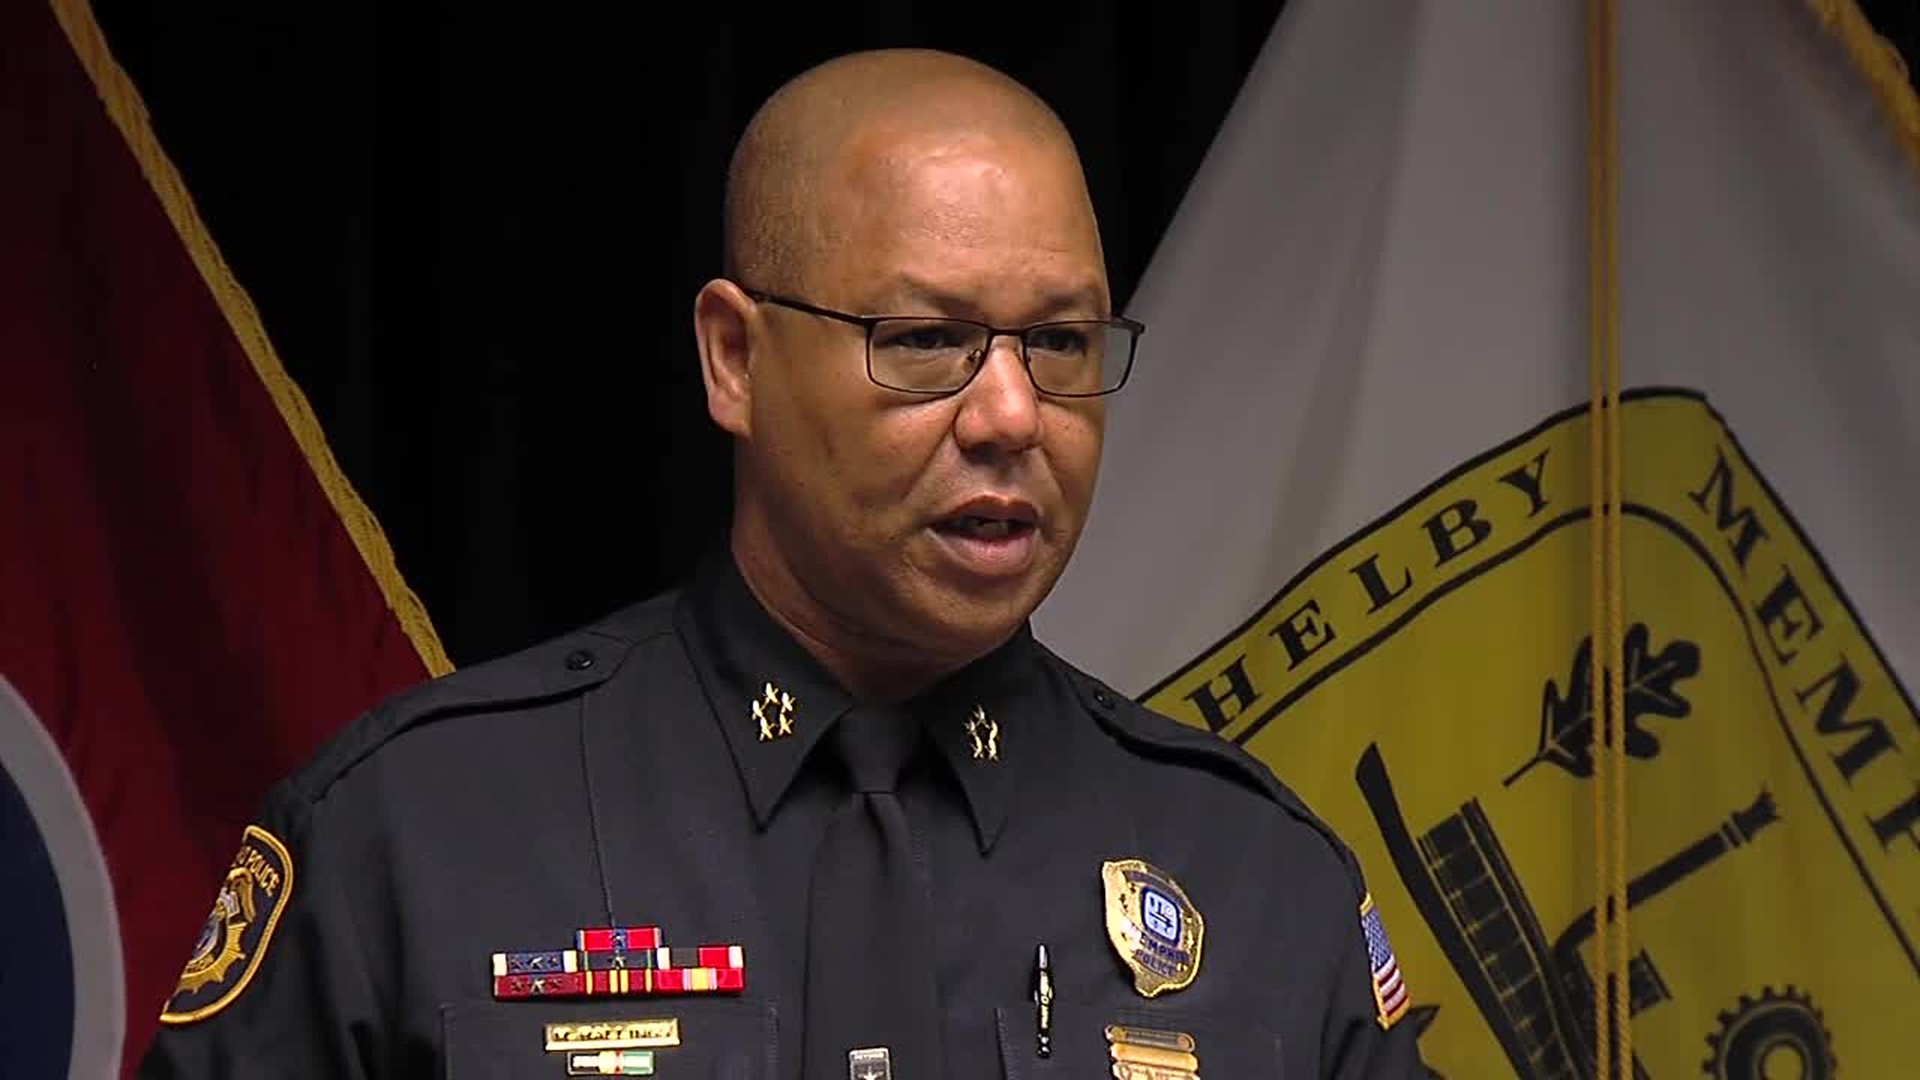 WEB EXTRA: MPD Director Mike Rallings full news conference 6/18/2019